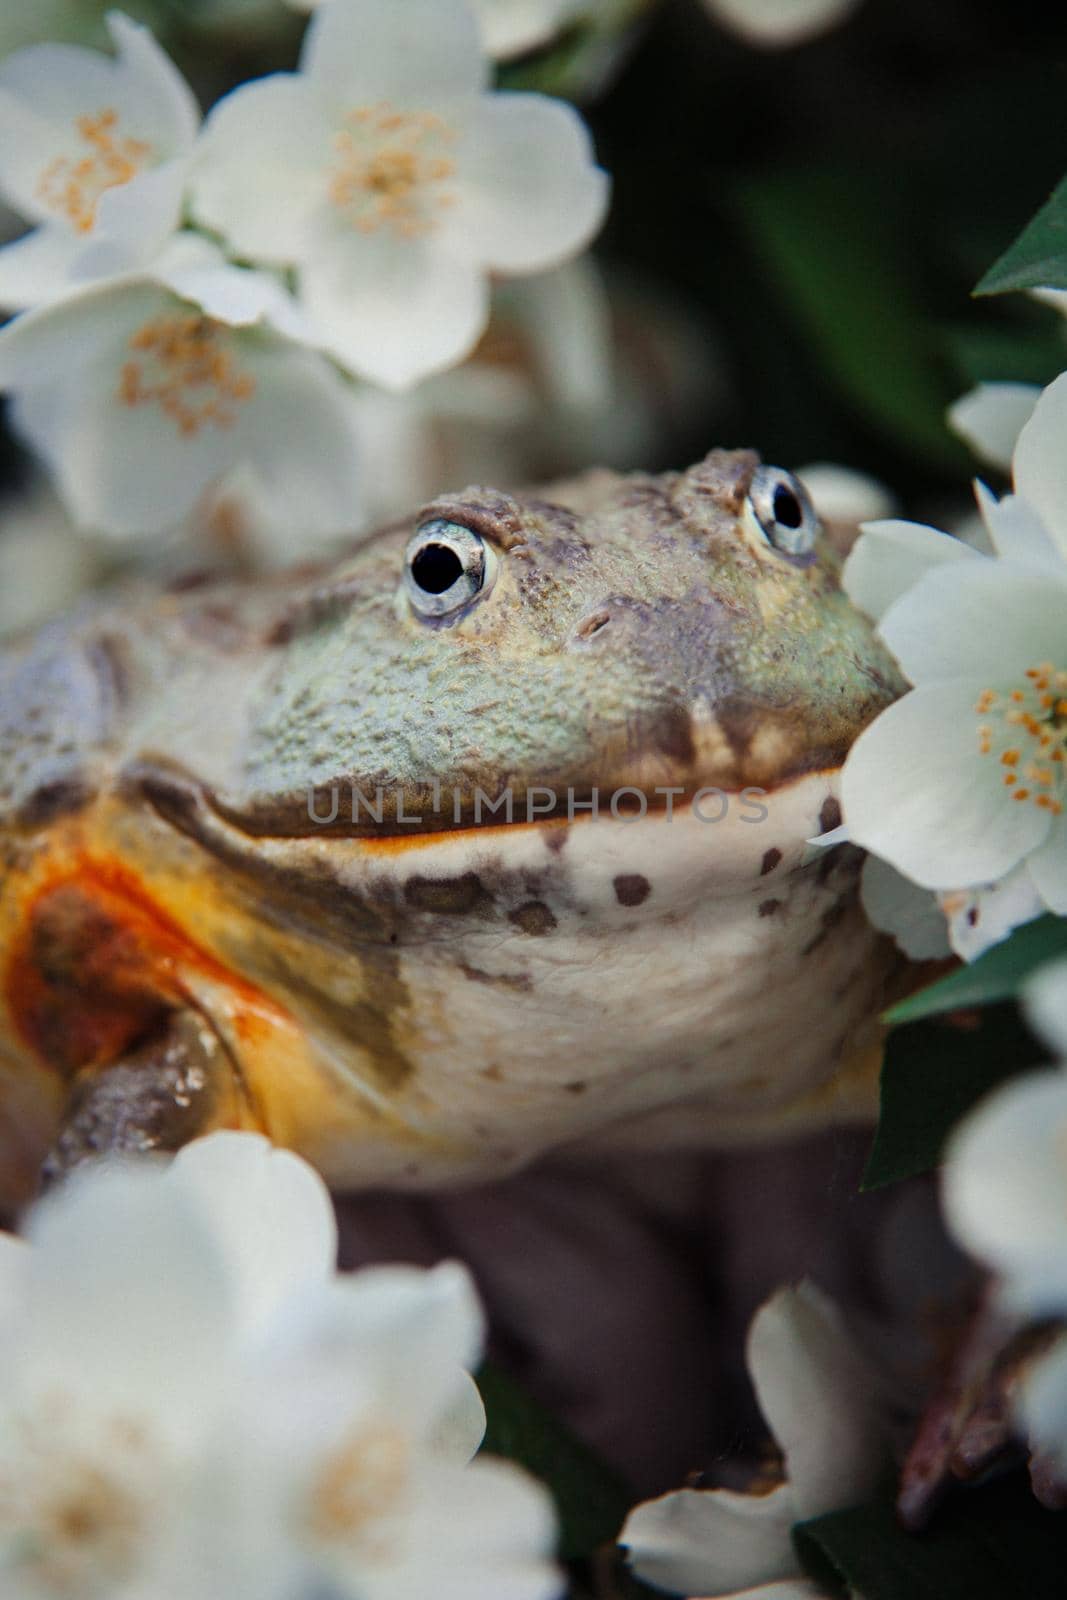 The African bullfrog, adult male with philadelphus flower bush by RosaJay